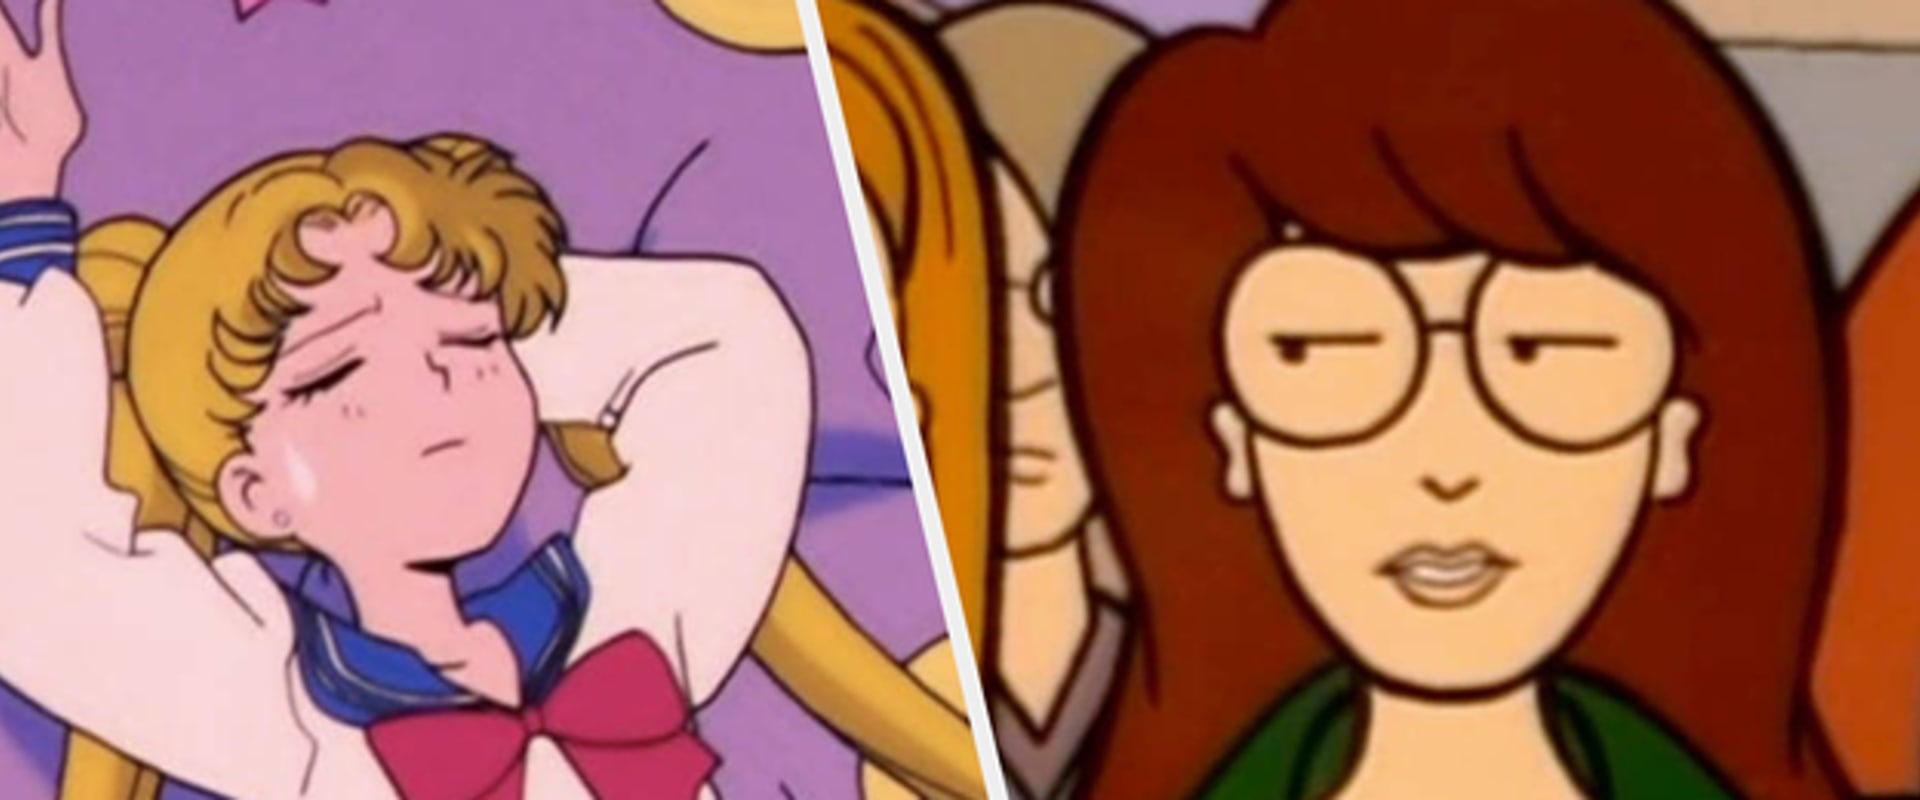 The Most Popular Cartoons from the 90s